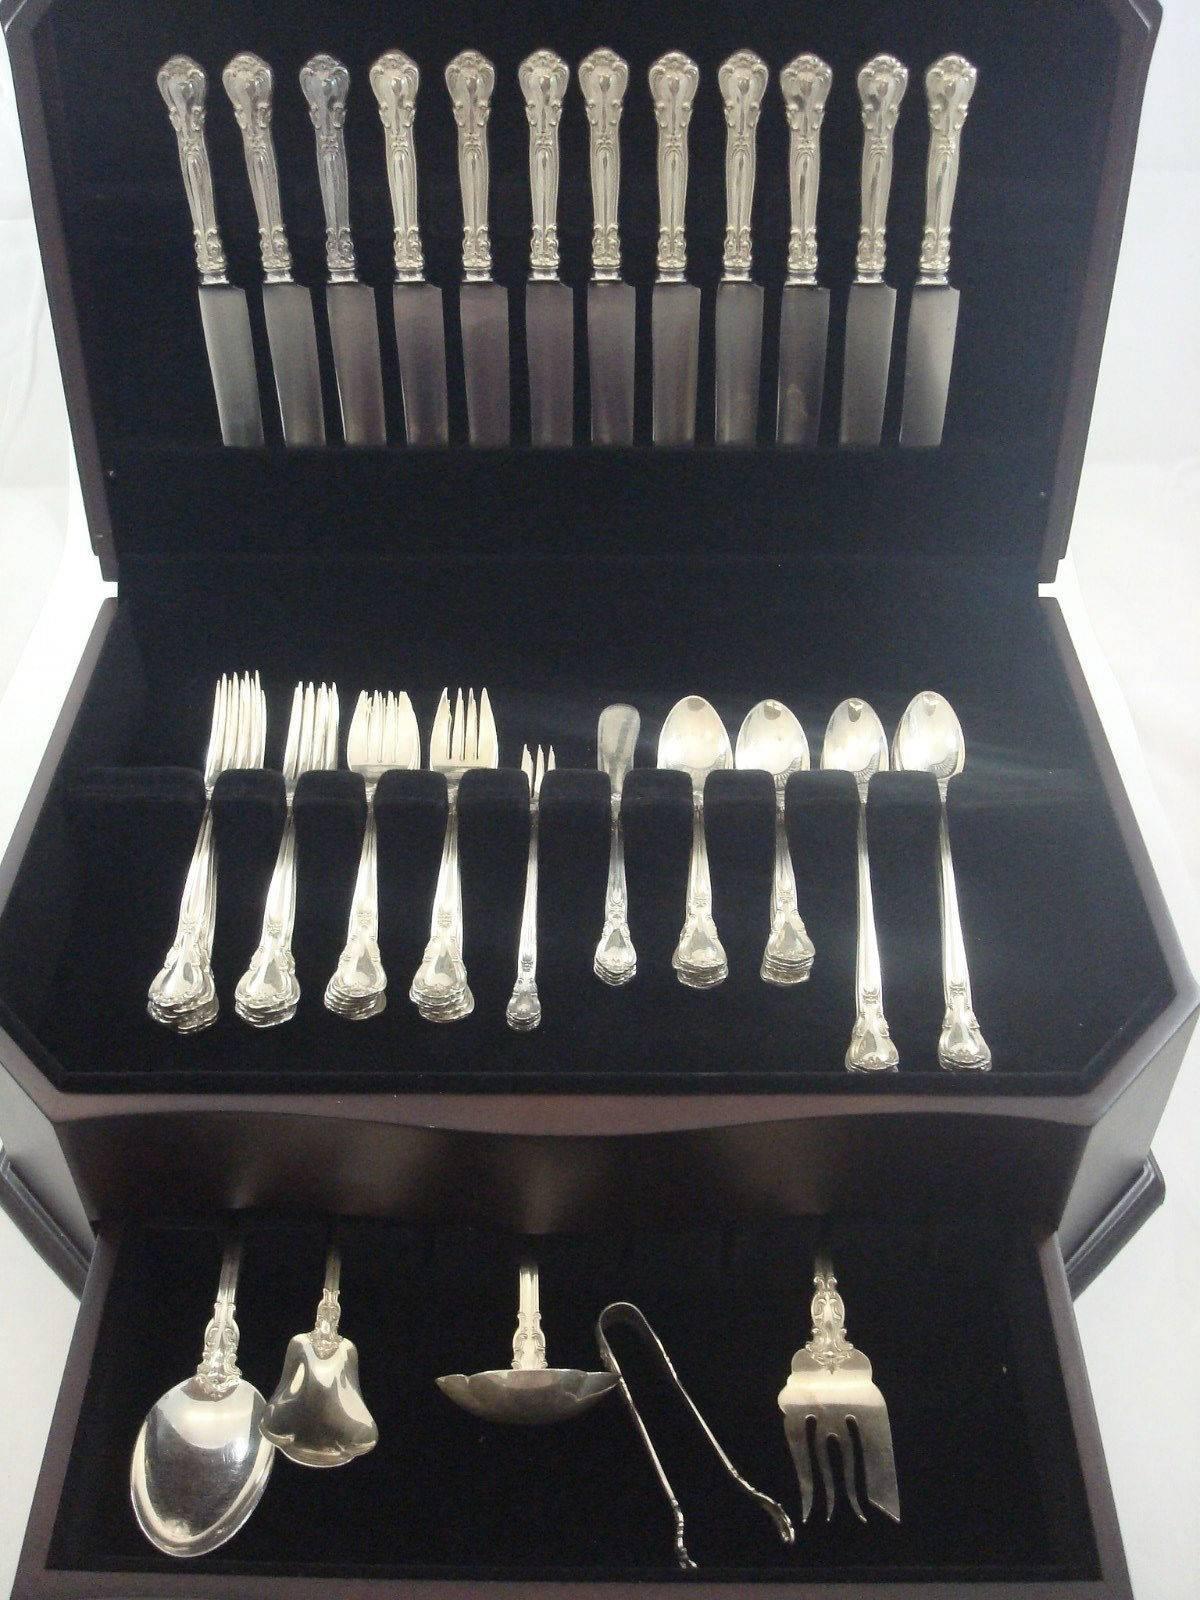 Chantilly by Gorham sterling silver flatware set of 90 pieces. This set includes: 

12 knives, 8 3/4